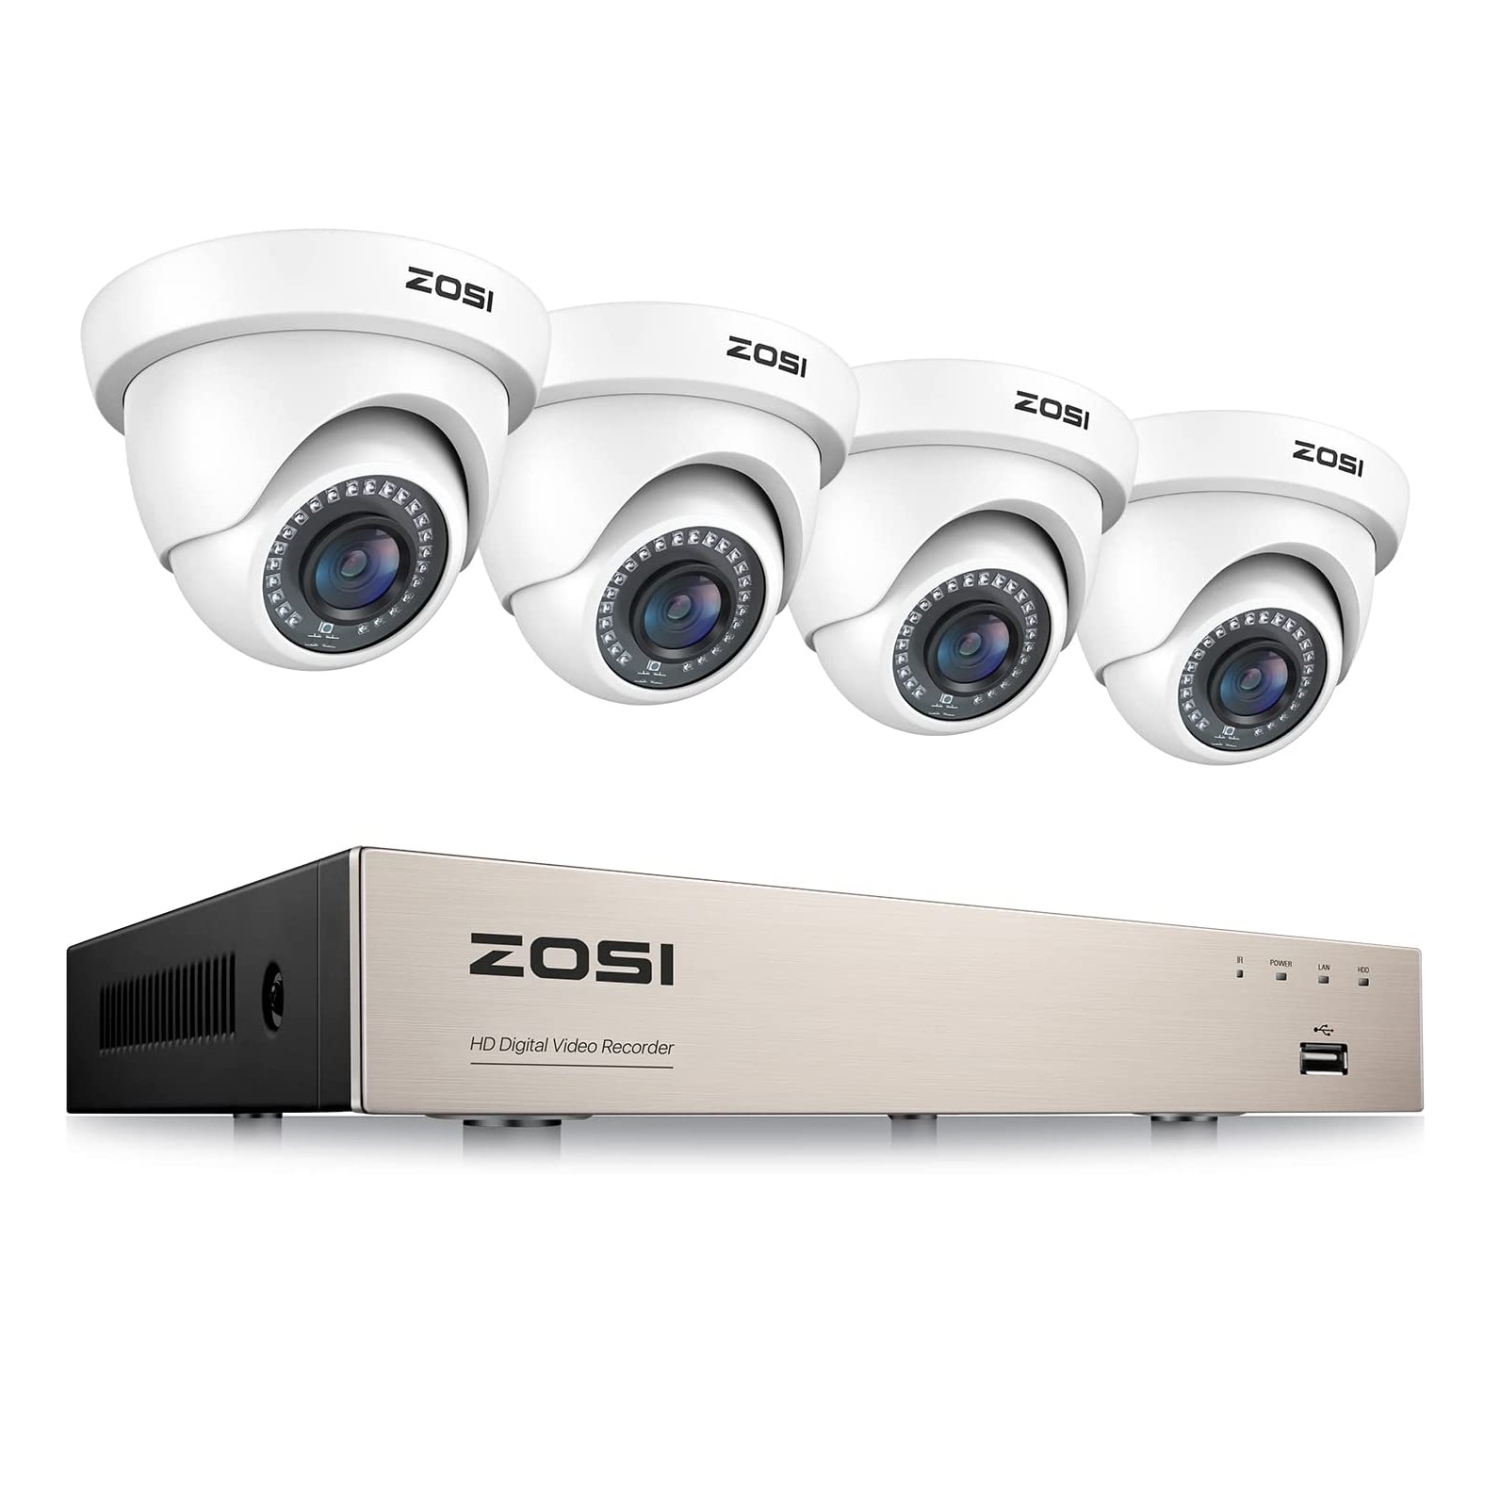 ZOSI H.265+ 8CH 5MP Lite DVR Home Security Camera System, 4pcs 1080P Dome Outdoor Surveillance Cameras, 80ft Night Vision, Motion Detection, Remote Access - White